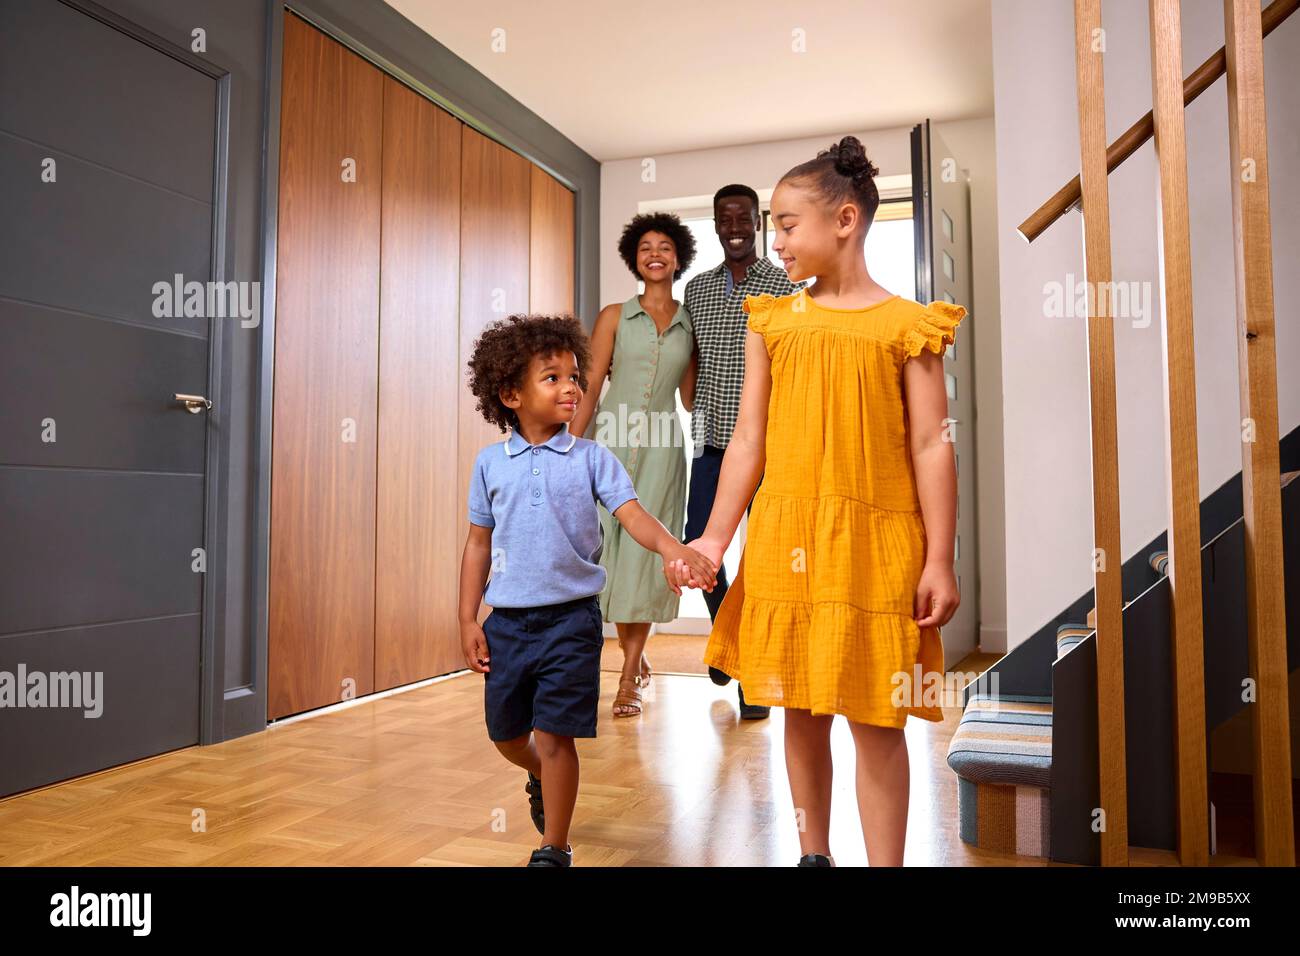 Family Coming Home After Day Out Opening Front Door And Walking Into Hallway Stock Photo